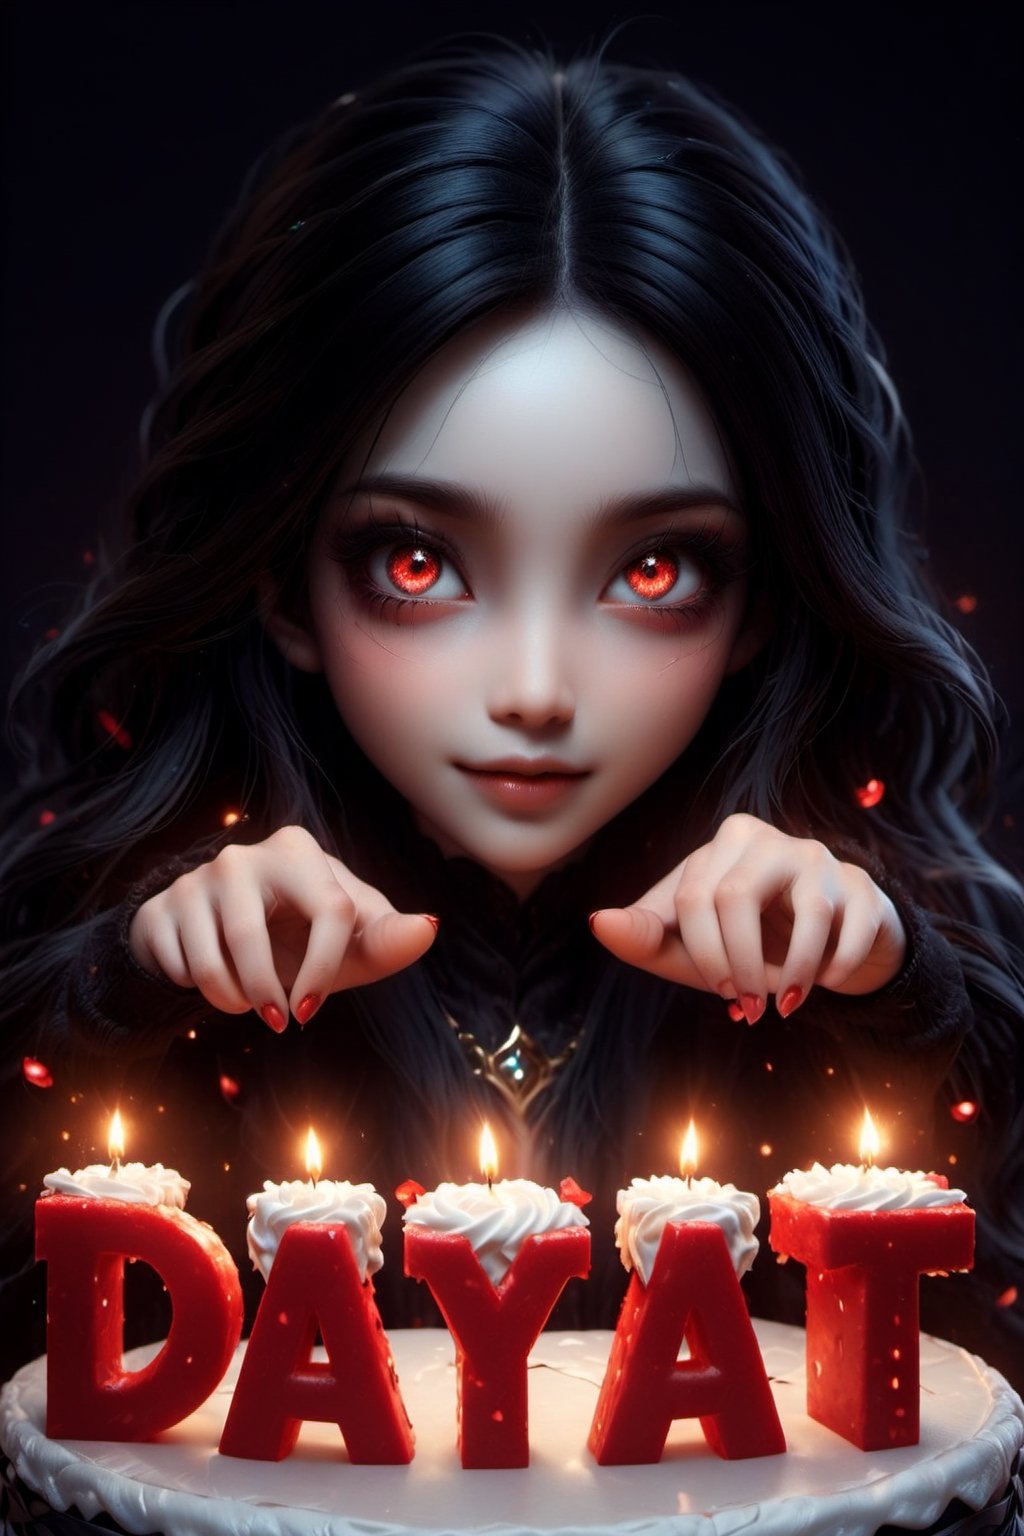 Masterpiece, best quality, ultra high res, ultra detailed, detailed face, detailed eyes, dark fantasy art, ((horror and dramatic)), 14 years old girl, upper body, beautiful girl, cute, (pale skin), long black hair, in ear hair, smile, red birthday cake at table, (holding a big black sign with (("DAYAT")), text logo, black, red, glowing, glow:1.3, with her hands, (red glowing eyes), sitting at night castle, focus on viewer, front view, Movie Still, upper body, monster,Text logo